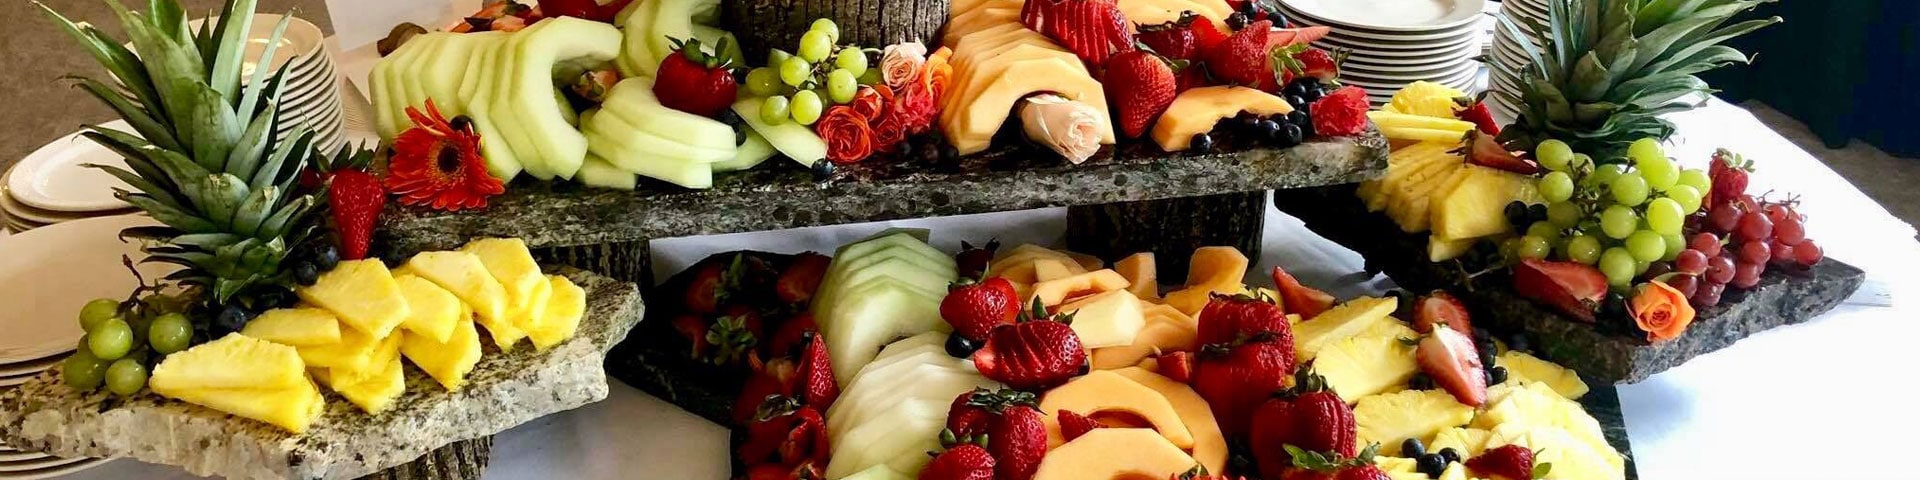 Sliced fruit display by Normandy Catering